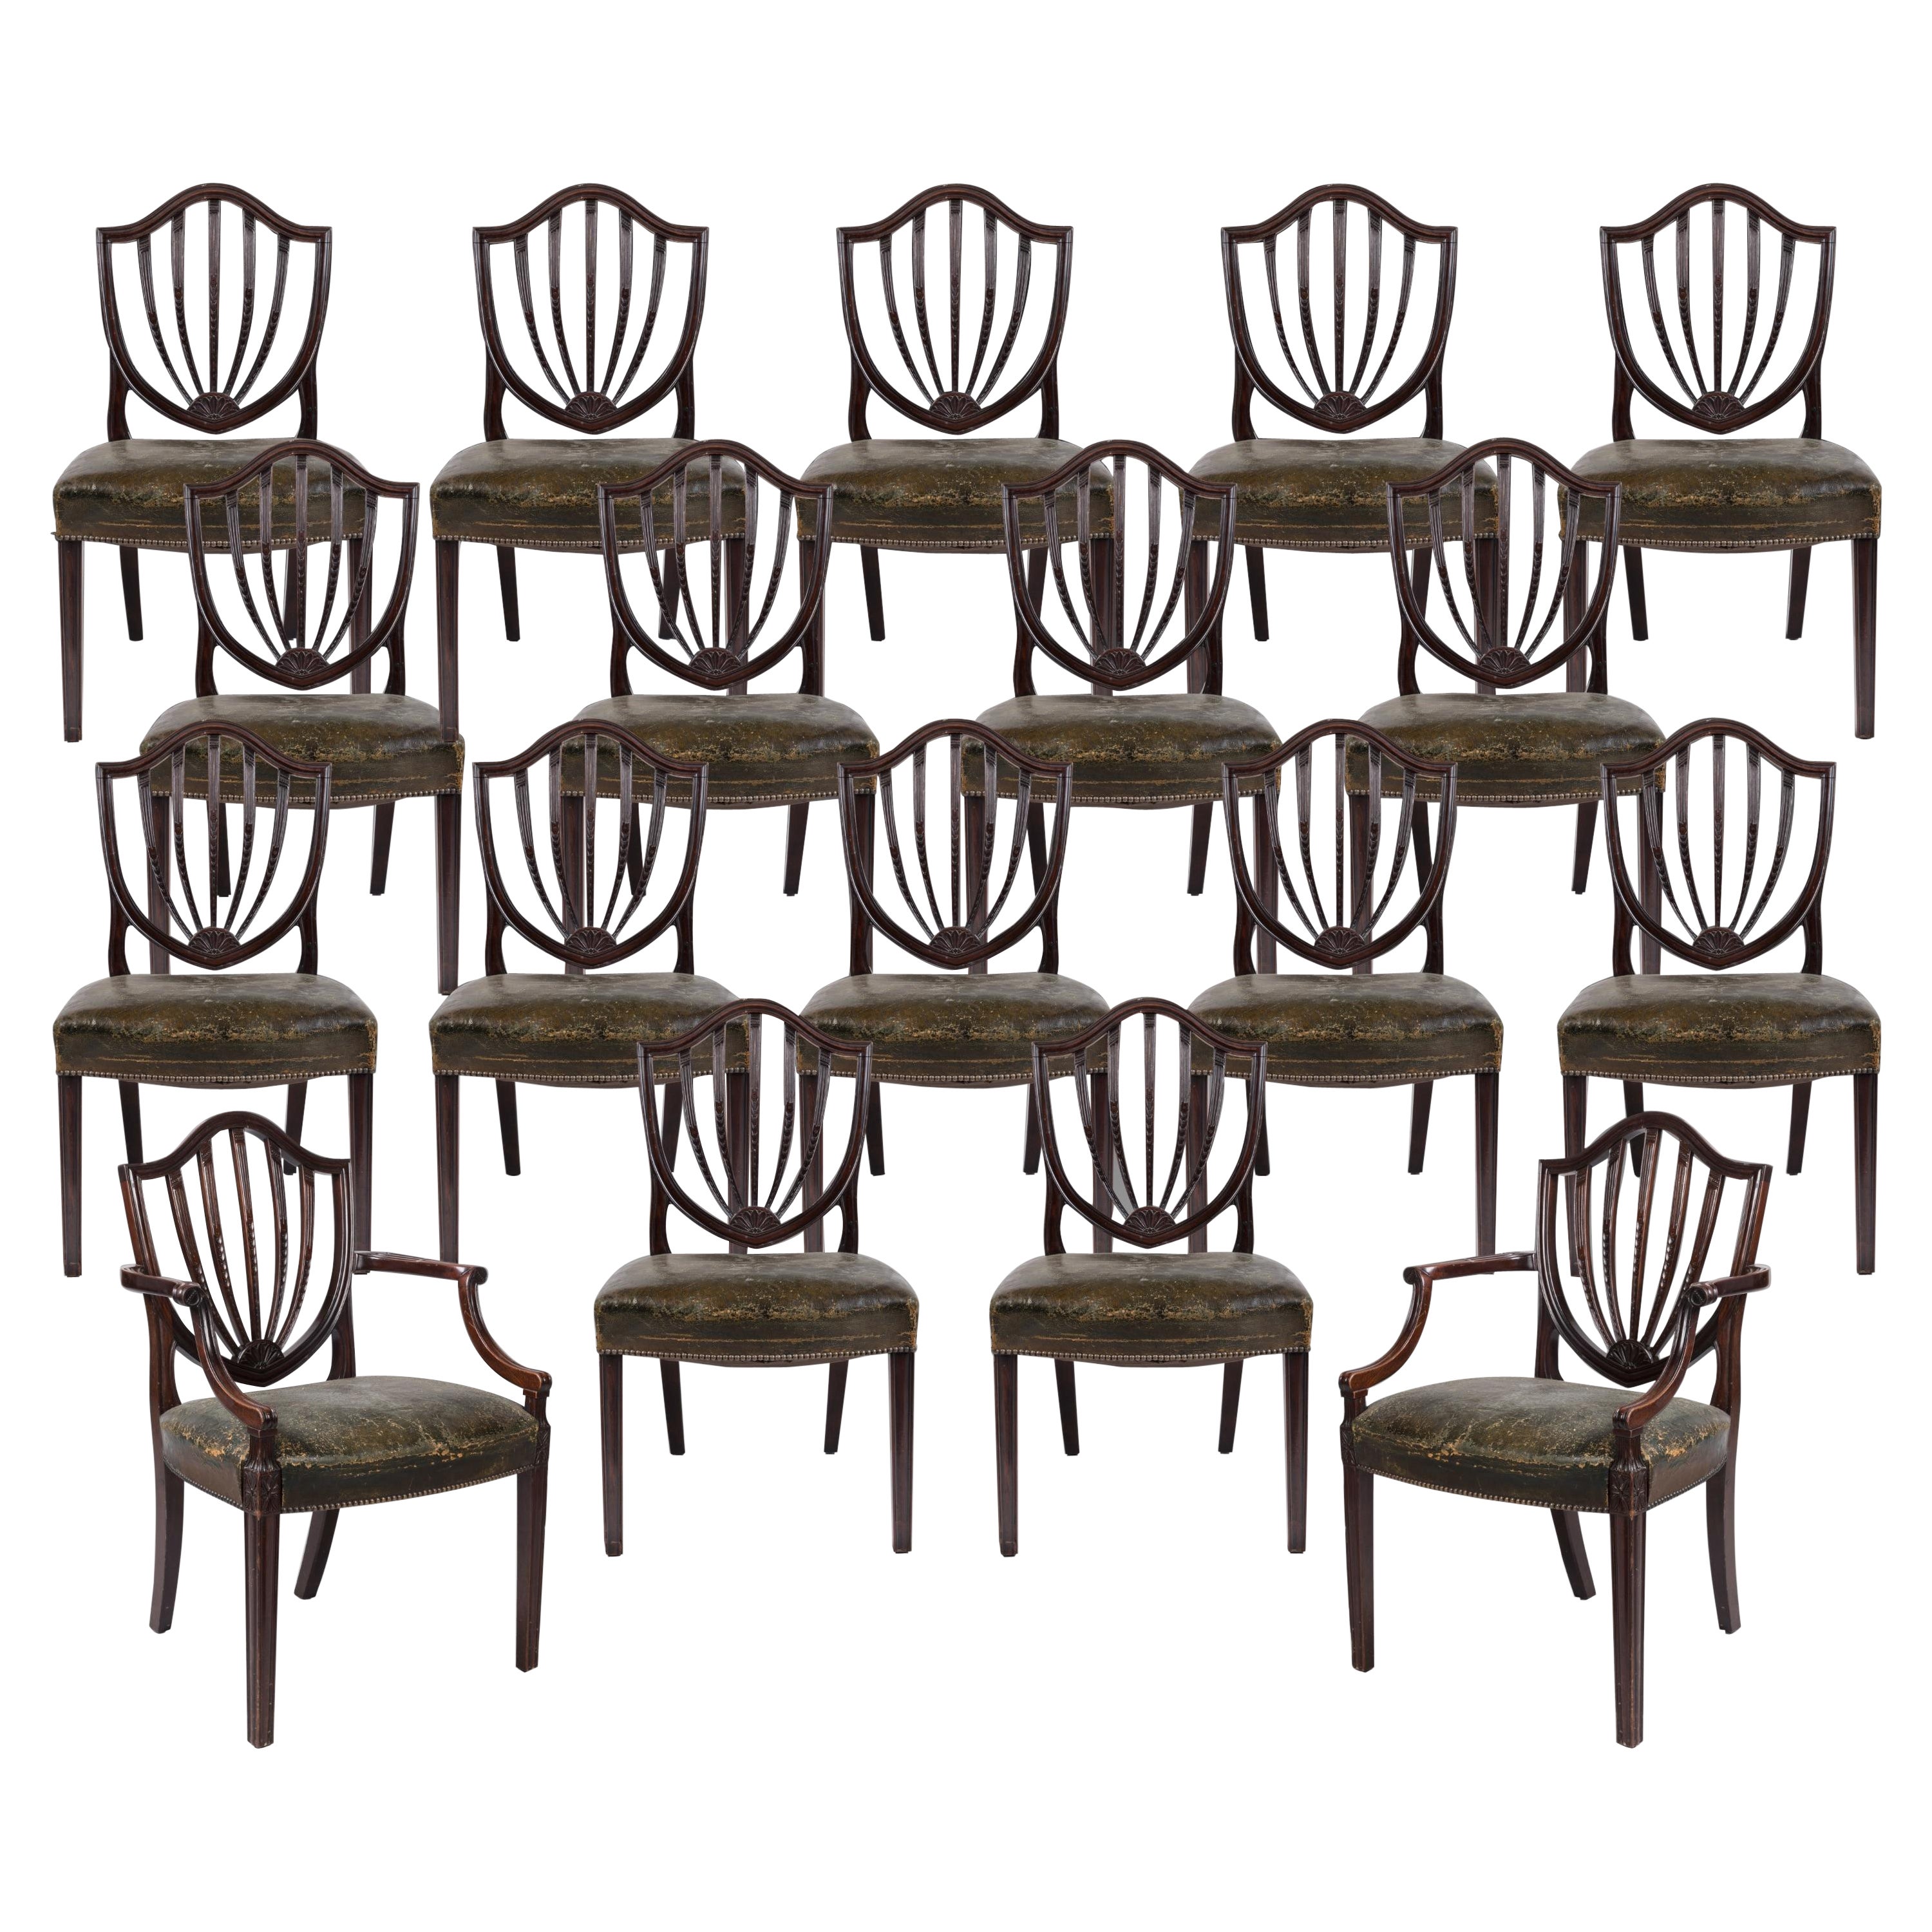 Rare 19th Century Period Set of 12 Mahogany Dining Chairs in the Georgian Style